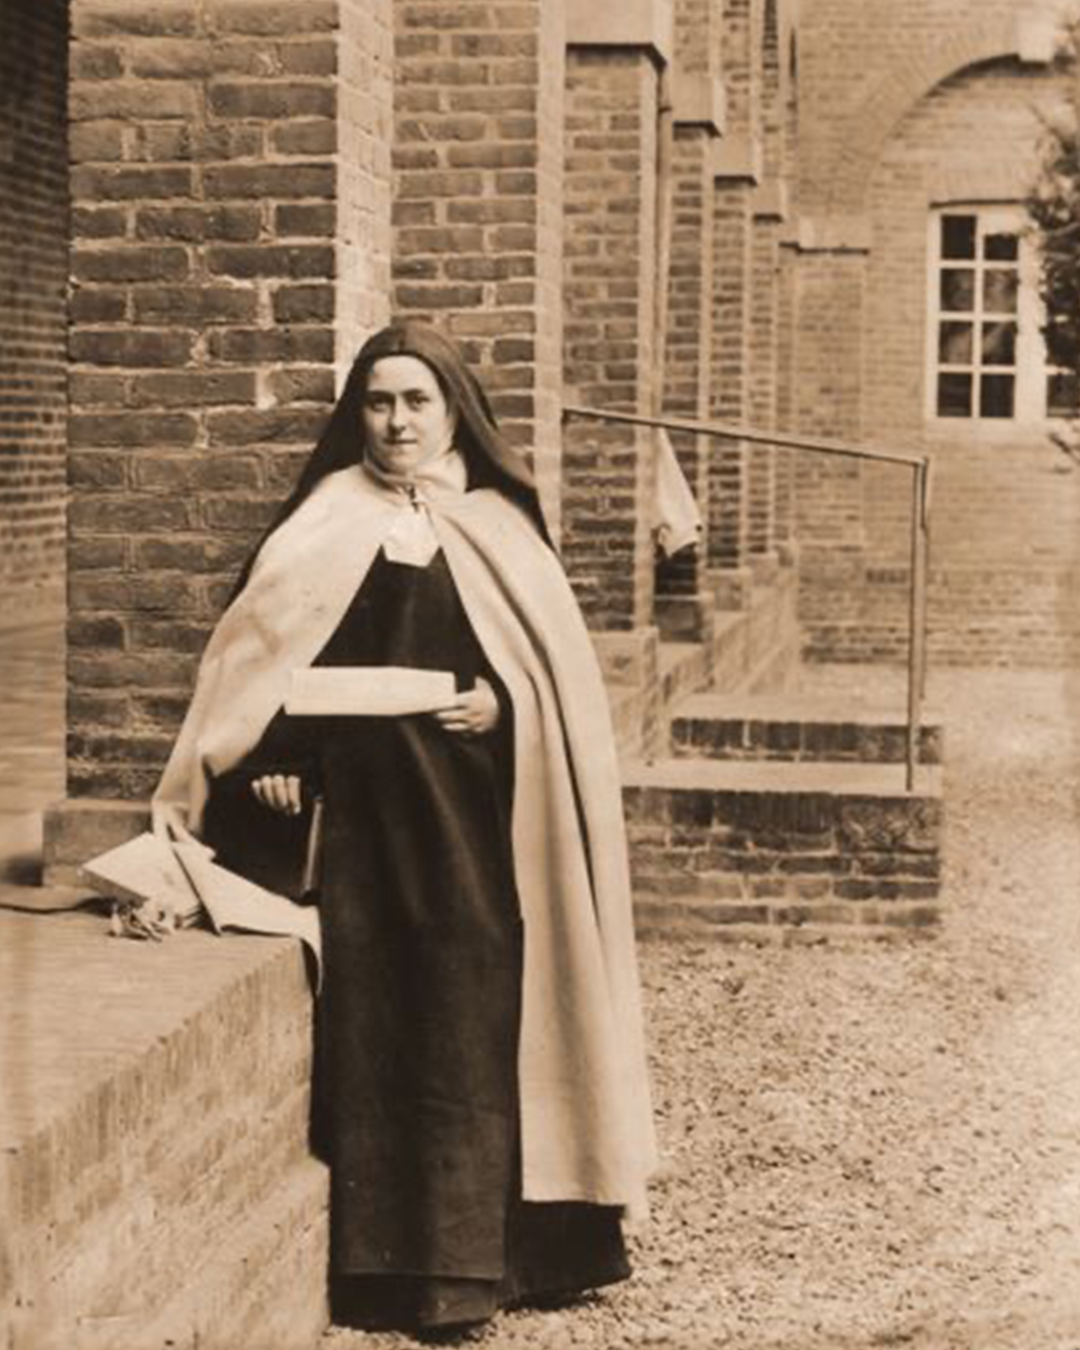 St. Therese in Carmelite habit leaning against a brick column with letter in hand.